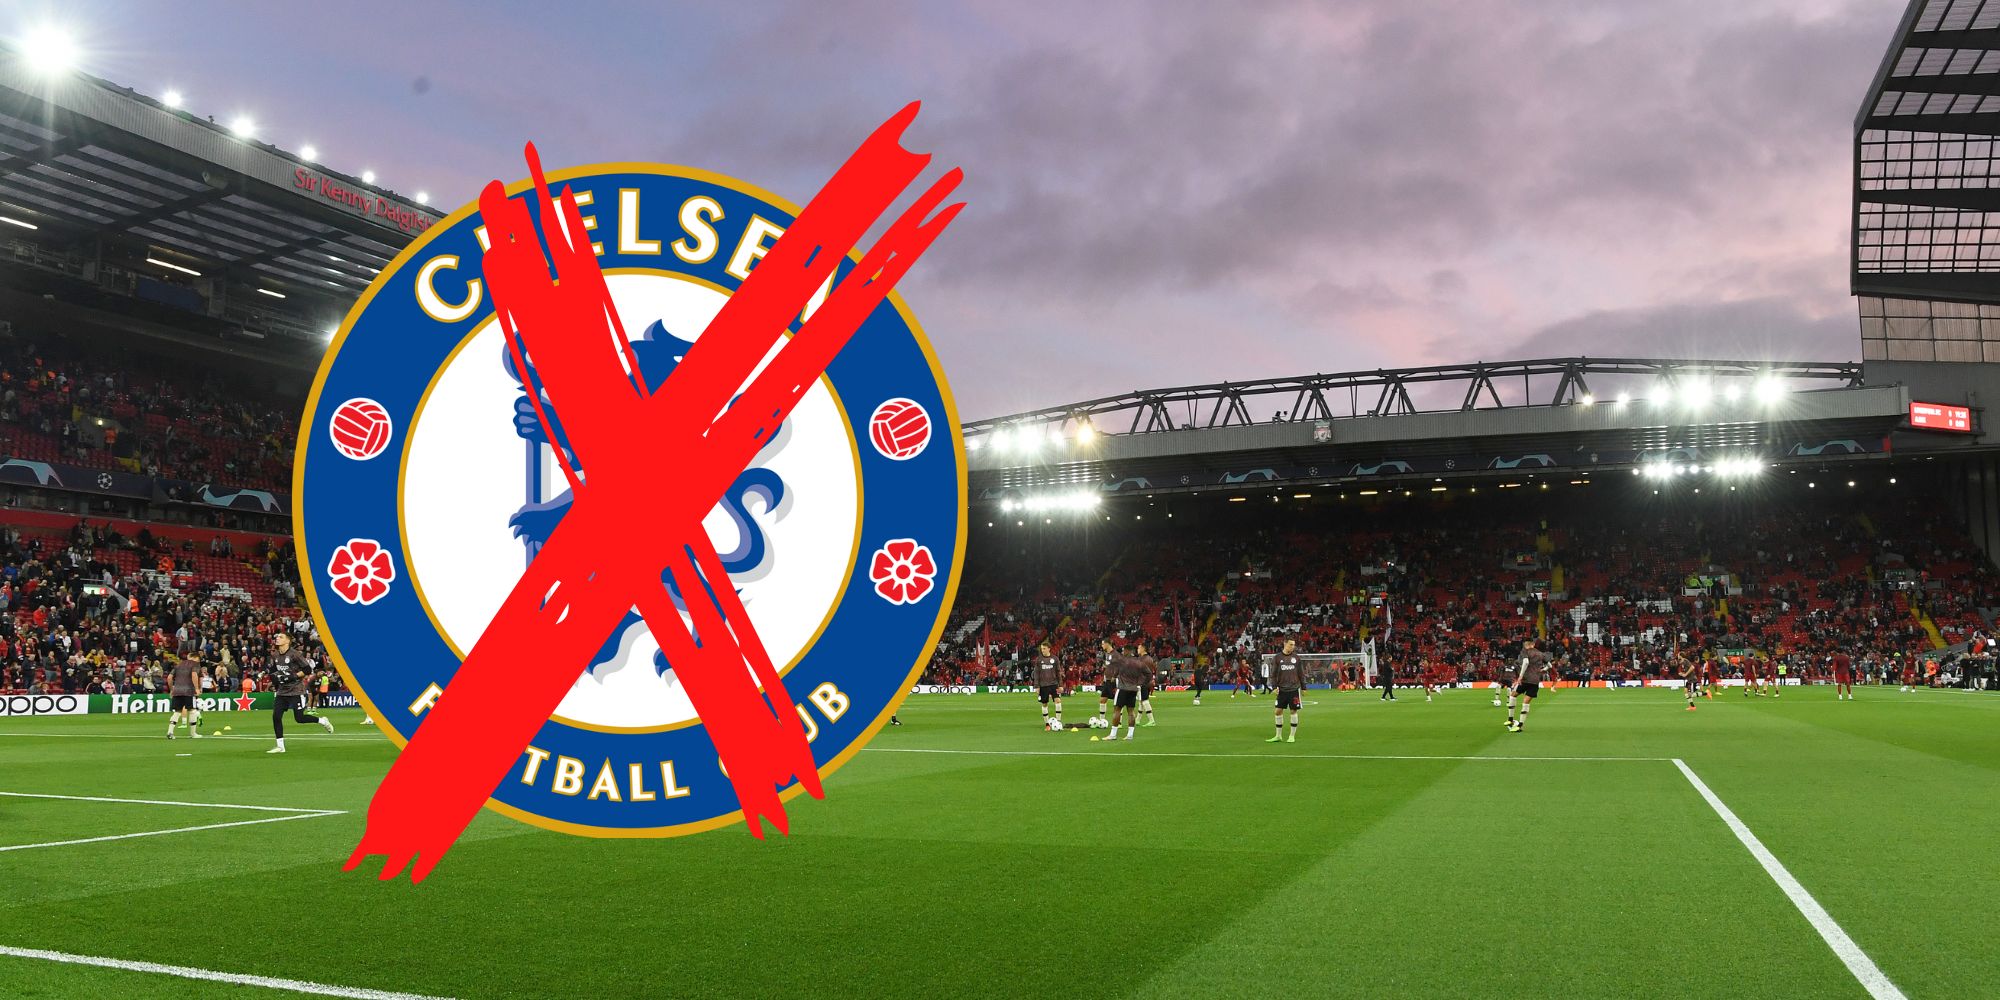 Chelsea bidders with billions have no interest in buying Liverpool